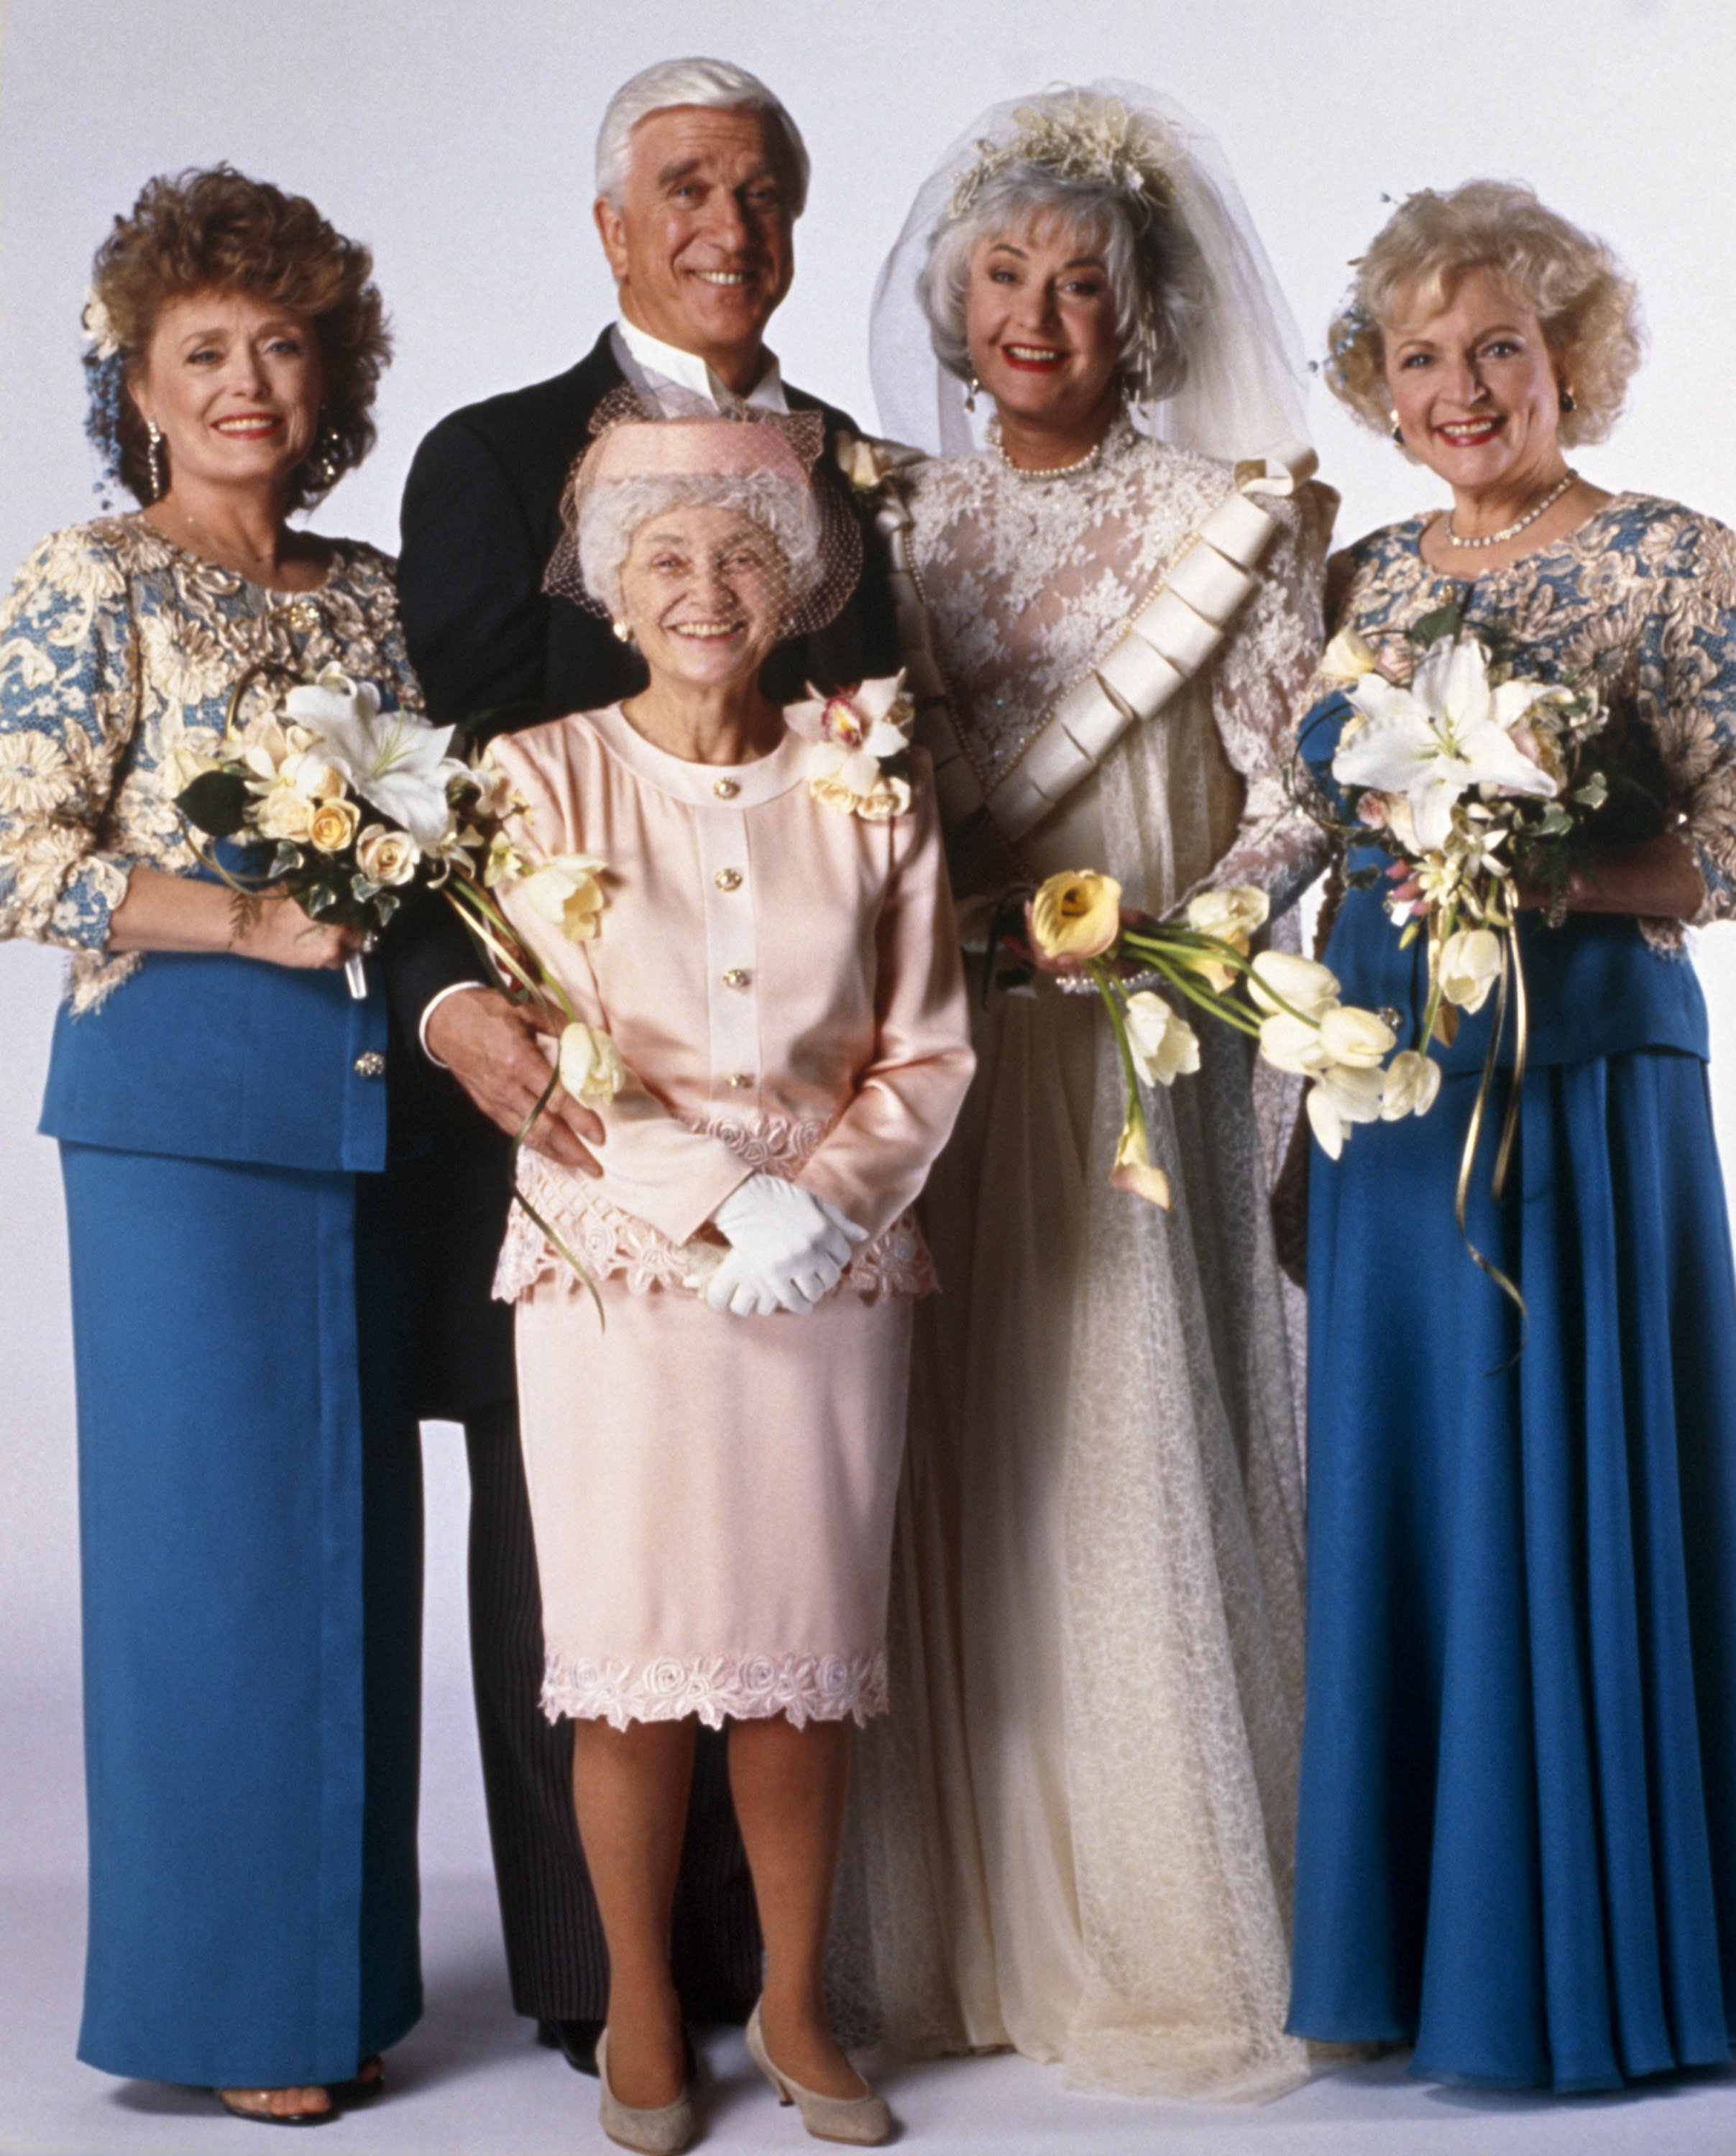 'The Golden Girls' actors Rue McClanahan, Estelle Getty, Bea Arthur, Betty White, and Leslie Nielsen in the wedding scene from the series finale.